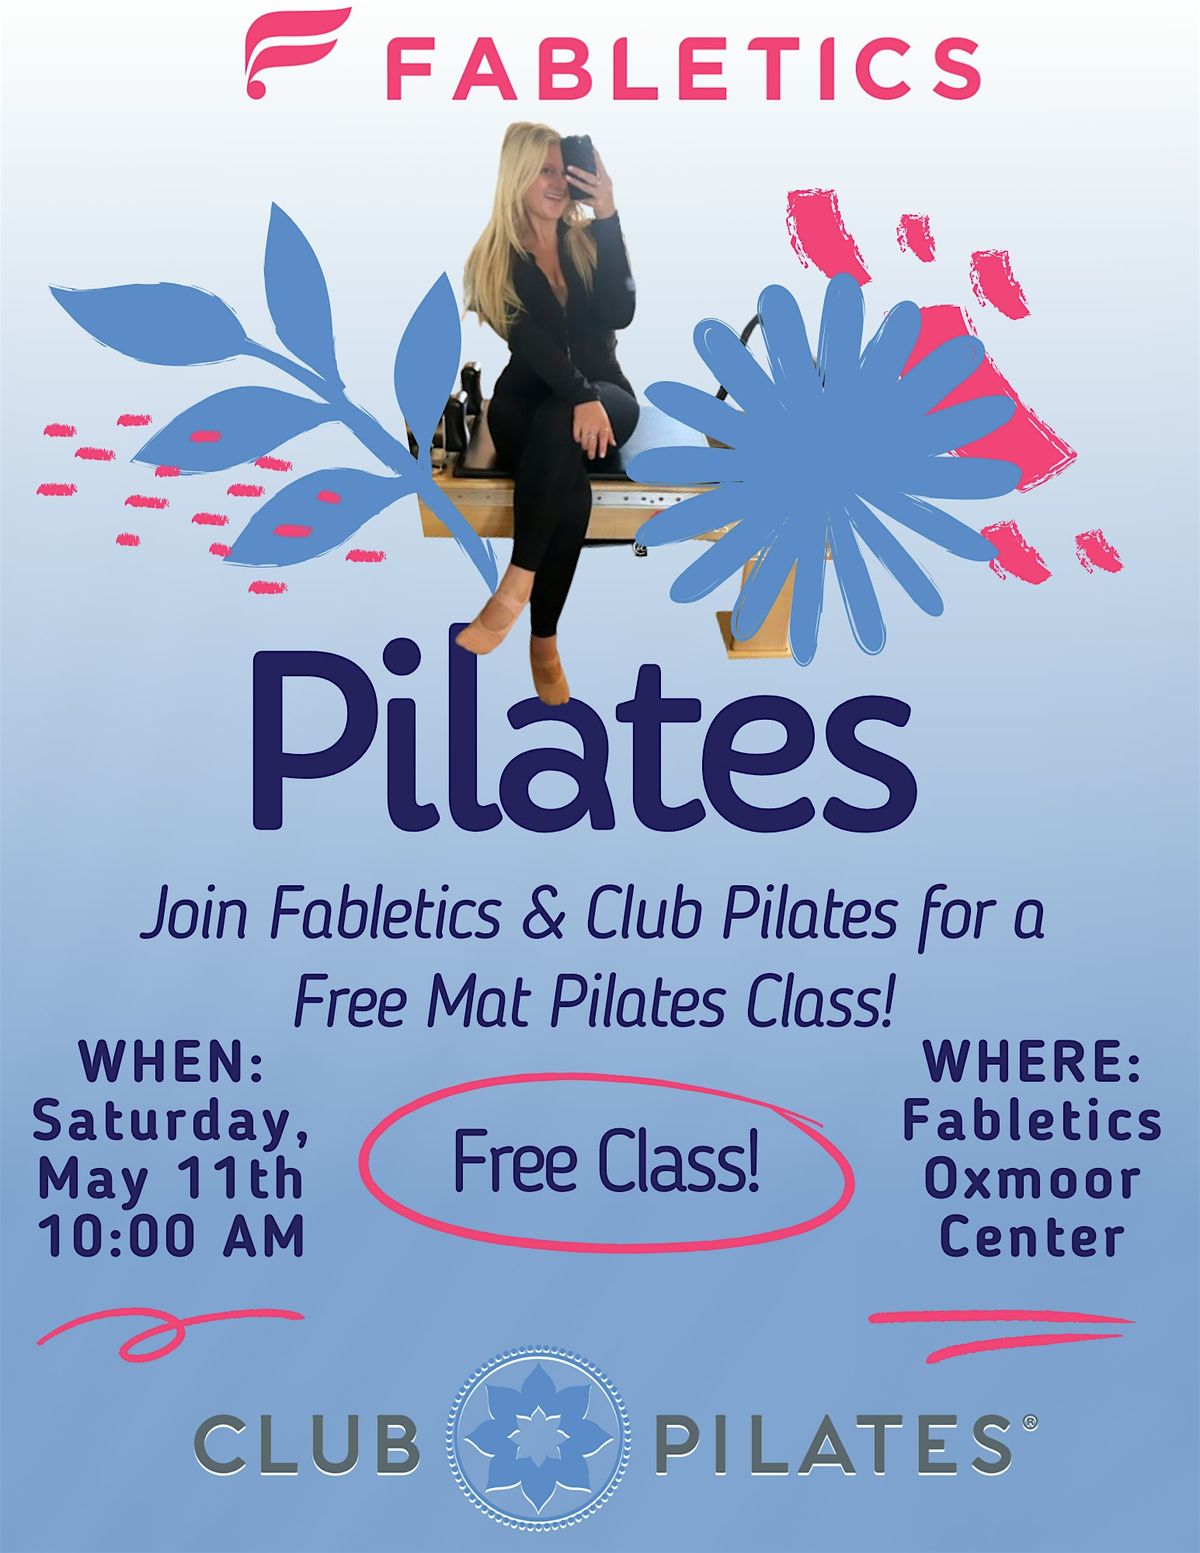 FREE PILATES CLASS with Fabletics & Club Pilates